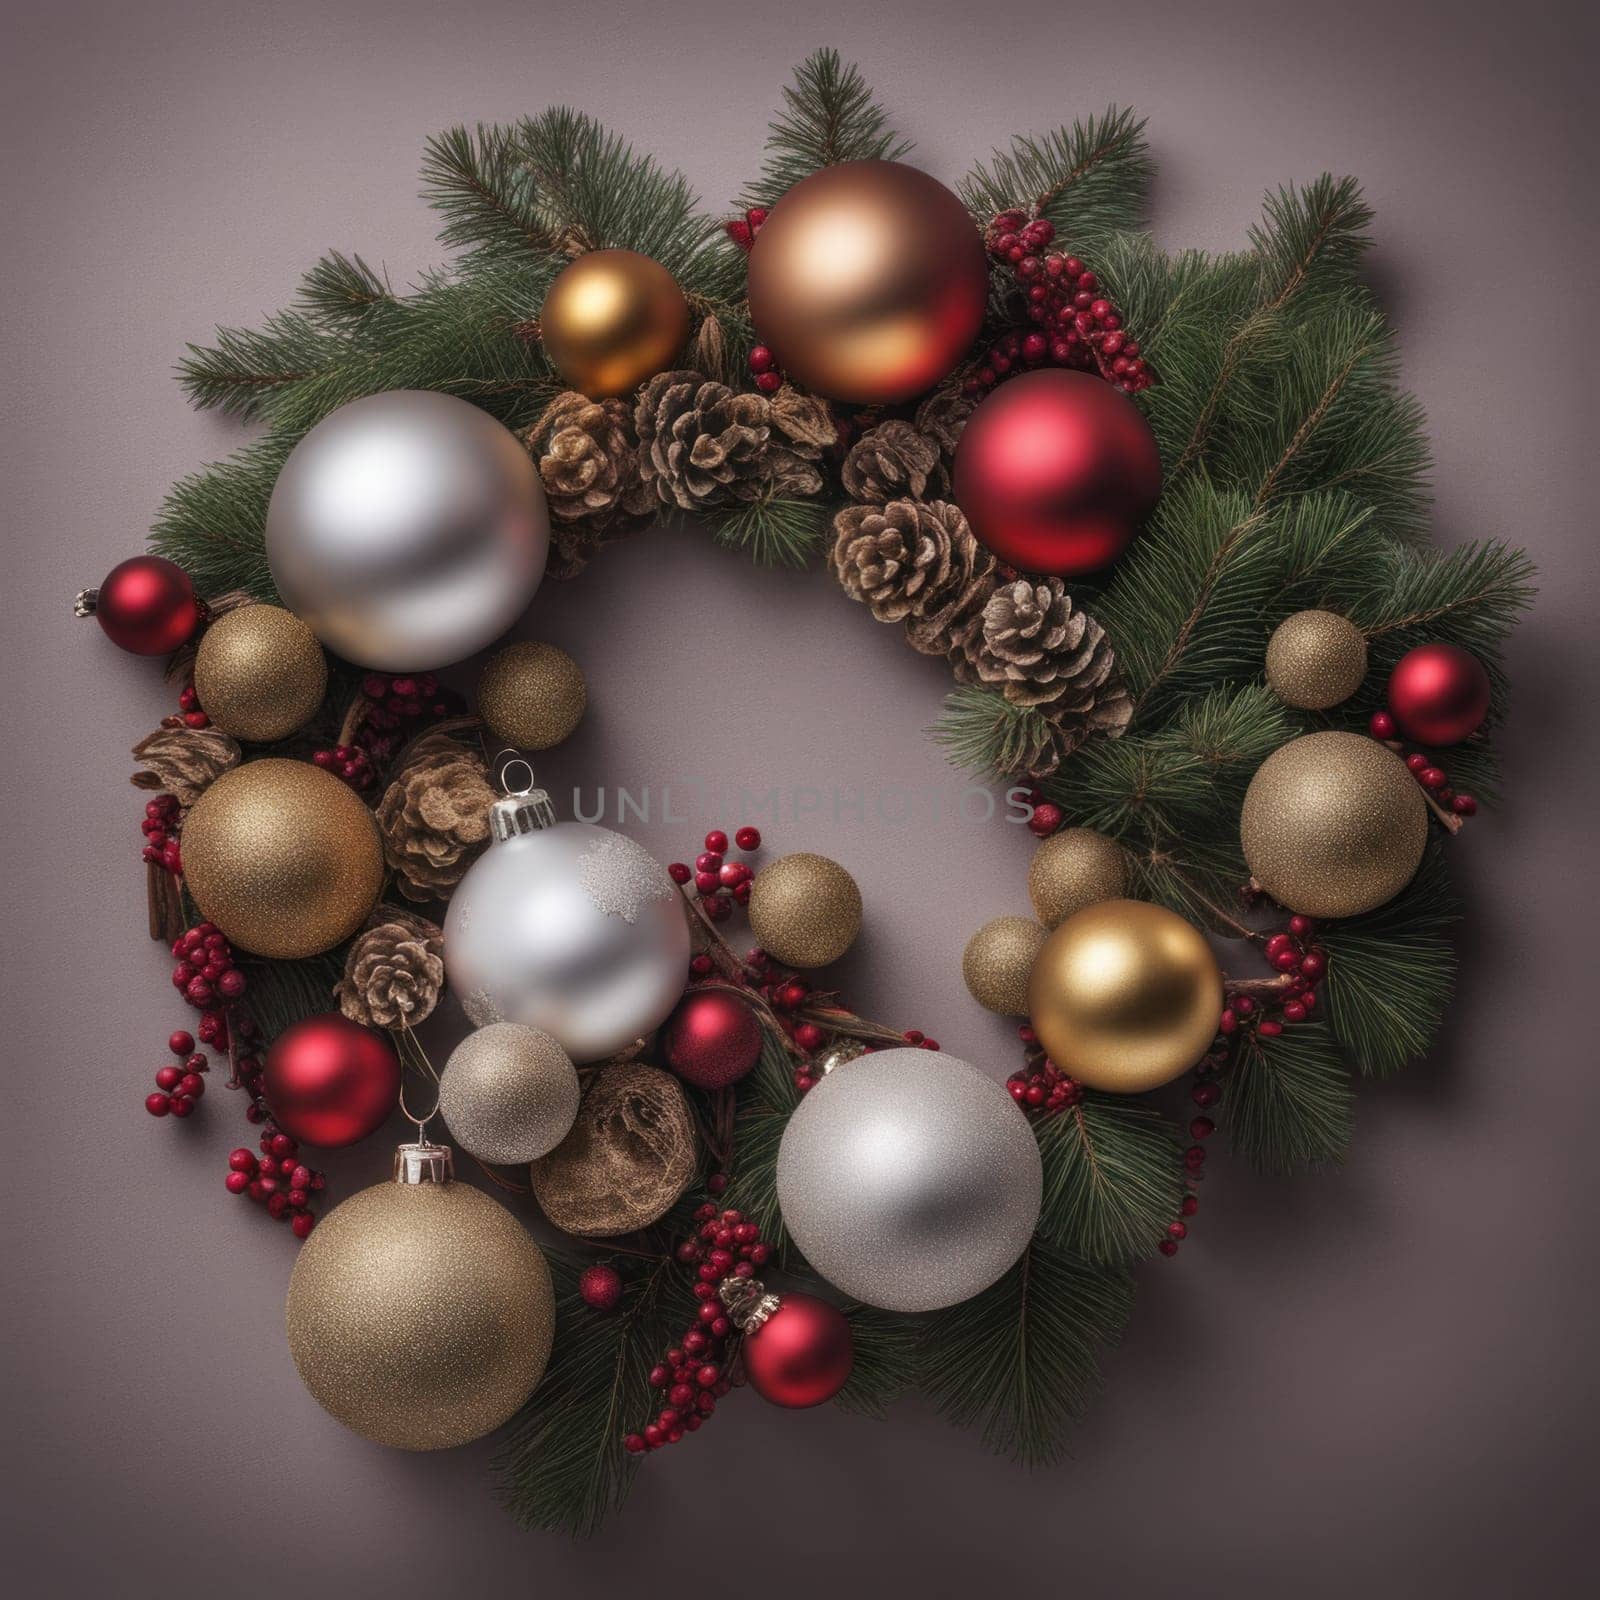 Close-UP of Christmas Tree, Gold and Silver Ornaments against a Defocused Lights Background by shaadjutt36